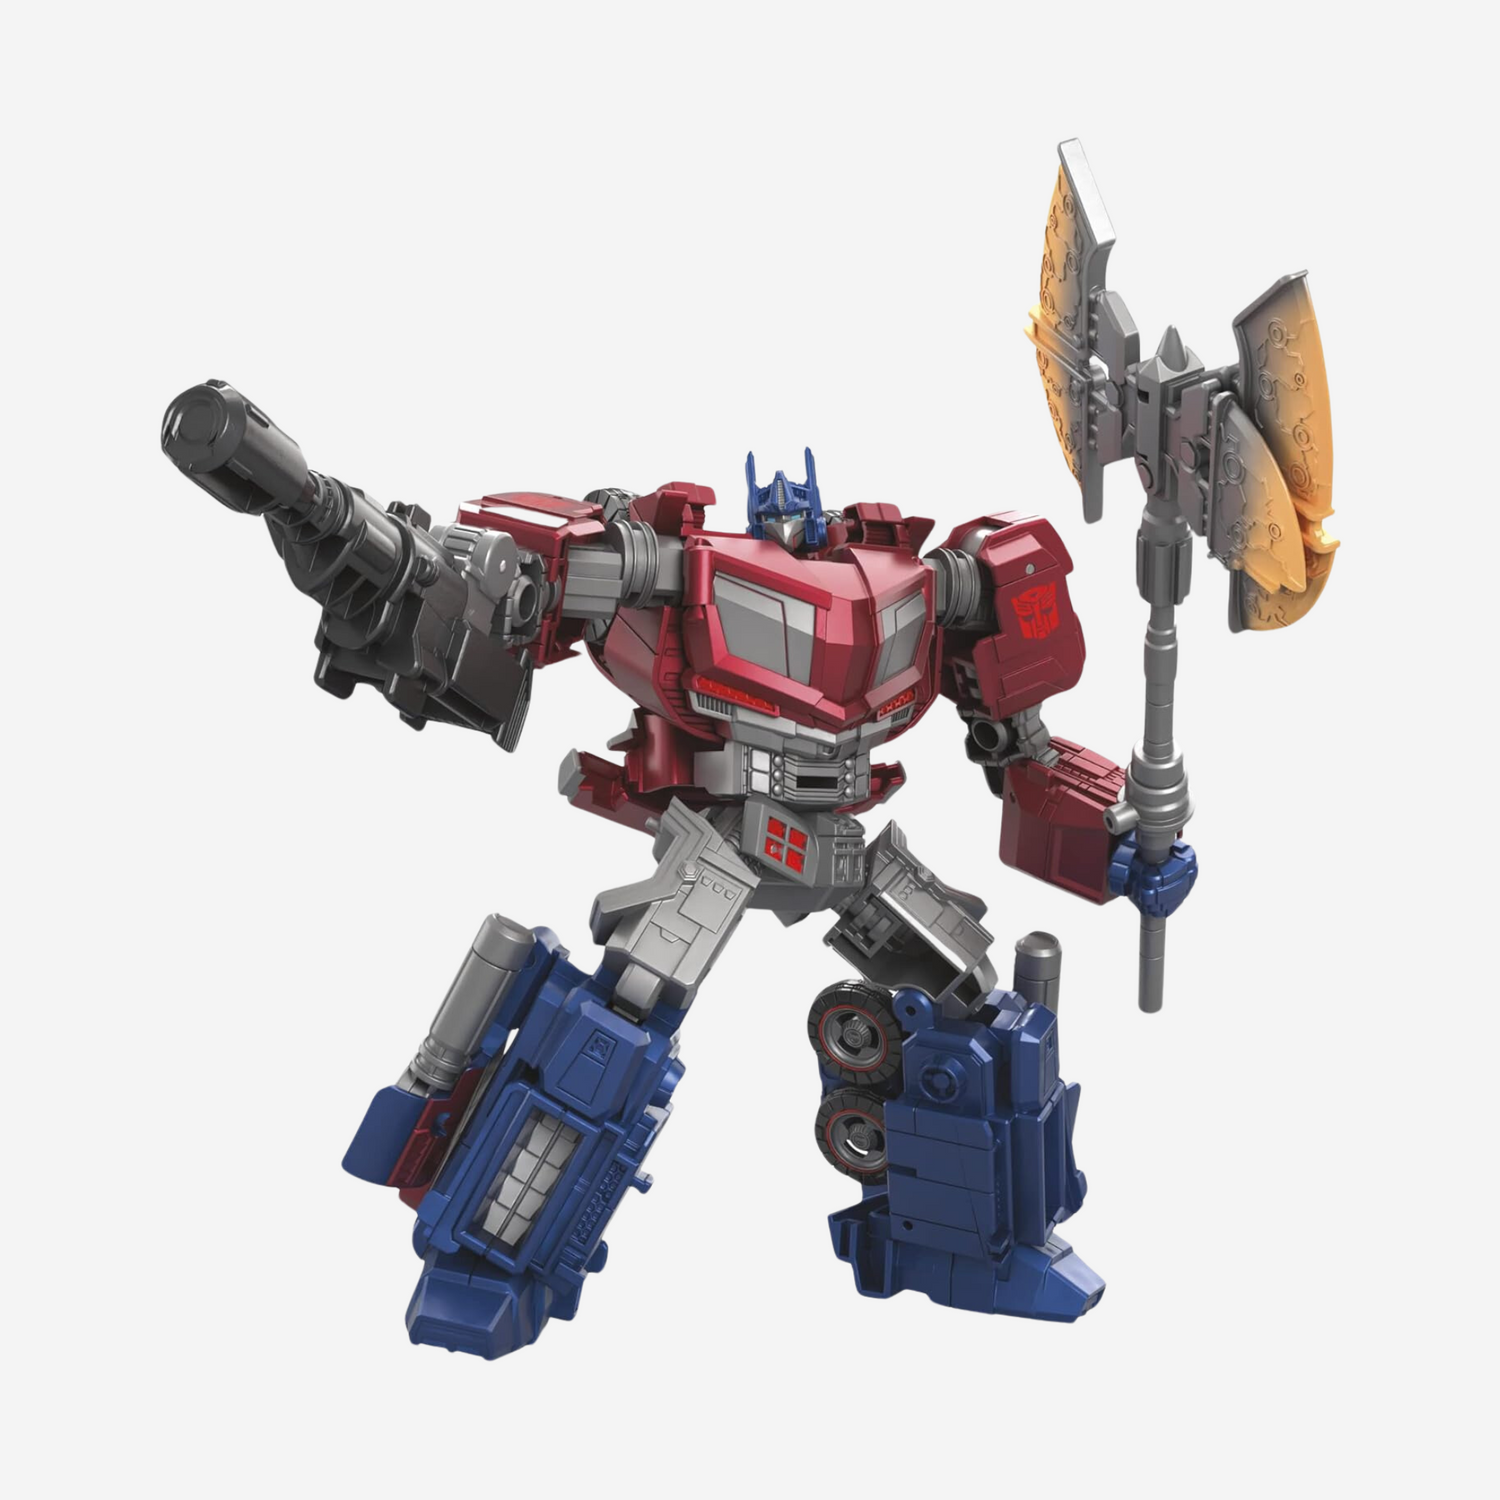 Transformers Toys Studio Series Voyager Class 03 Gamer Edition Optimus Prime Toy, 6.5-inch